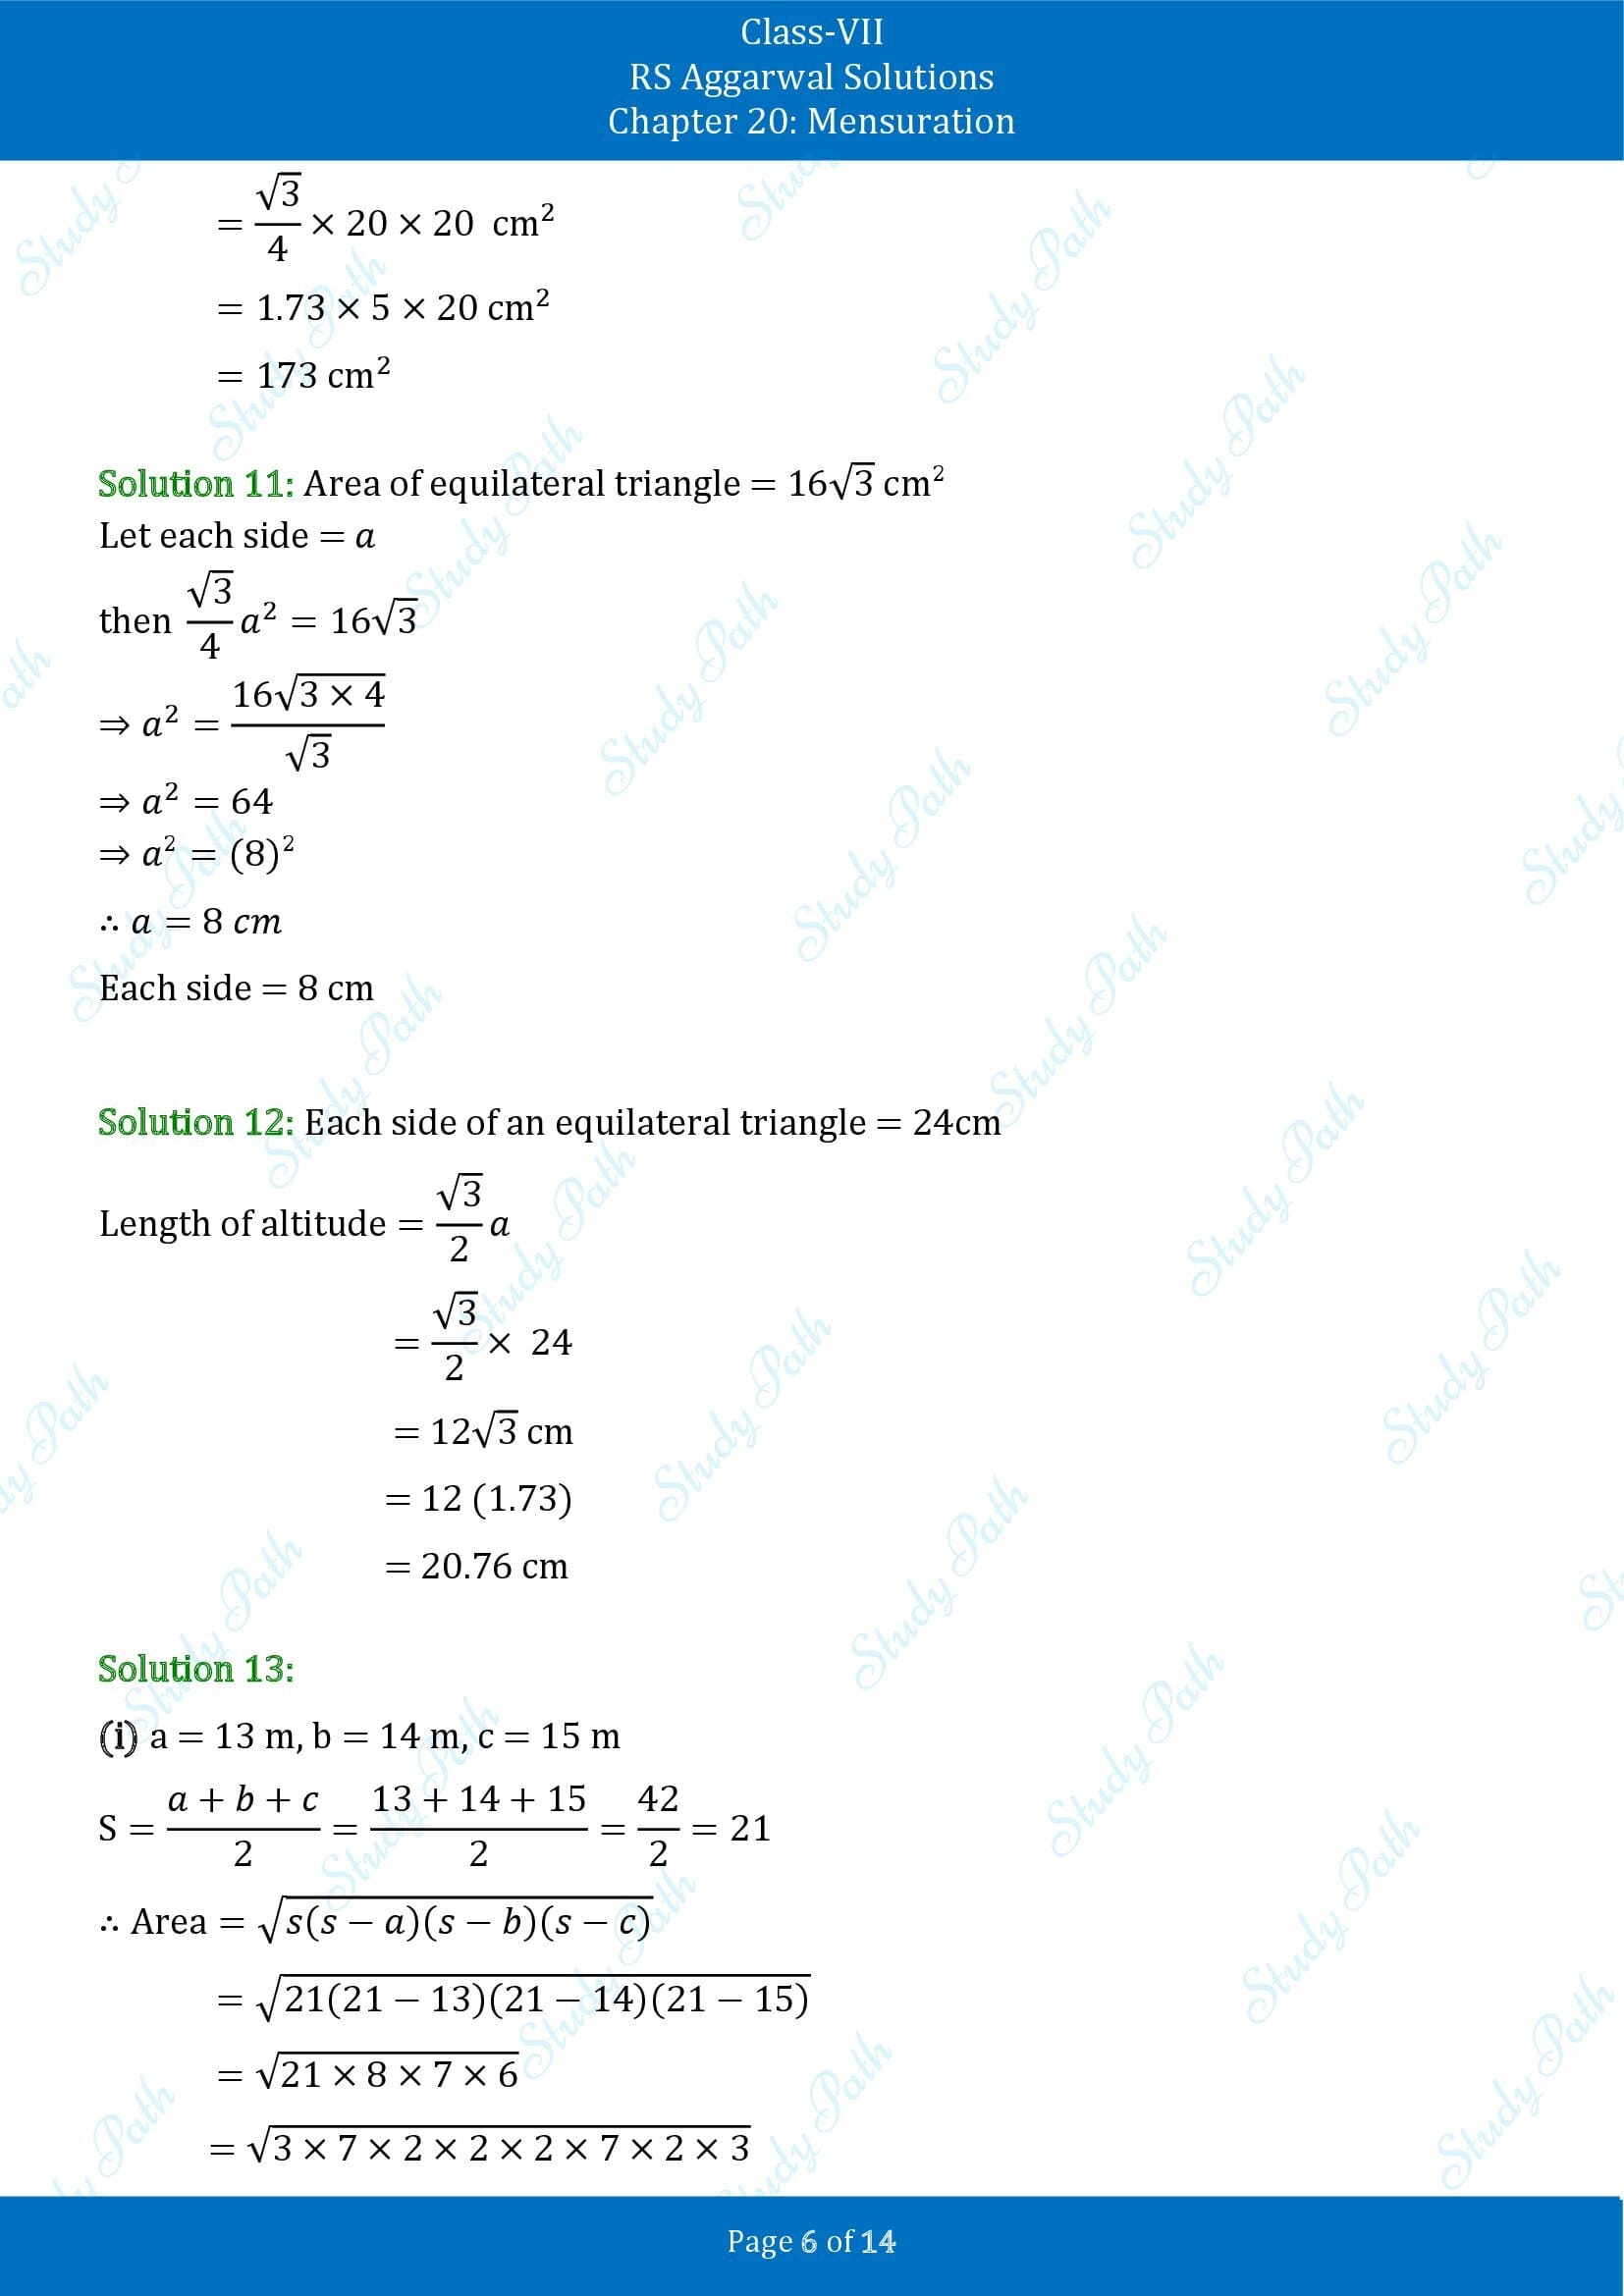 RS Aggarwal Solutions Class 7 Chapter 20 Mensuration Exercise 20D 00006